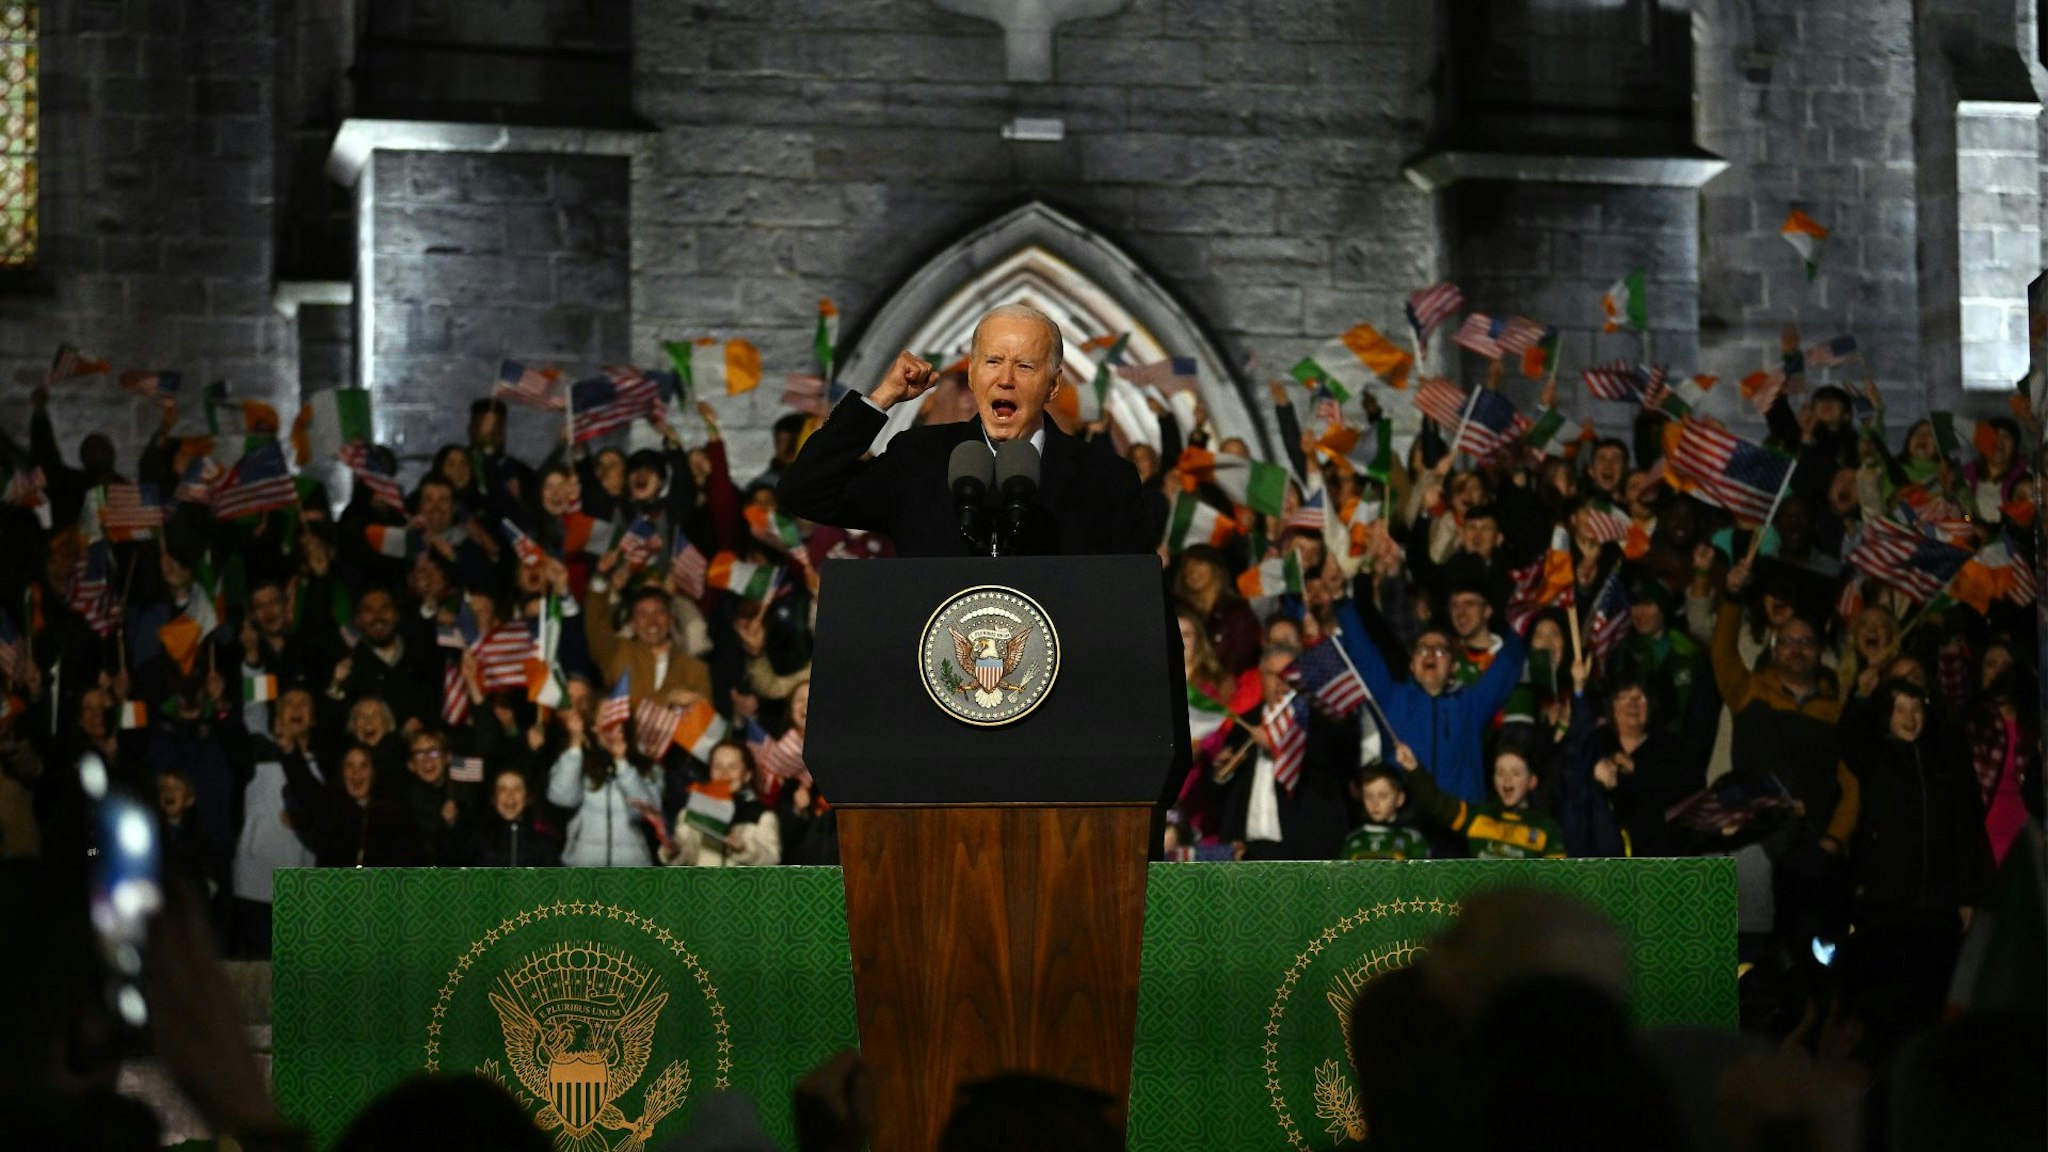 BALLINA, IRELAND - APRIL 14: U.S. President Joe Biden addresses a crowd during a celebration event at St Muredach's Cathedral on April 14, 2023 in Ballina, Ireland. U.S. President Joe Biden has travelled to Northern Ireland and Ireland with his sister Valerie Biden Owens and son Hunter Biden to explore his family's Irish heritage and mark the 25th Anniversary of the Good Friday Peace Agreement.